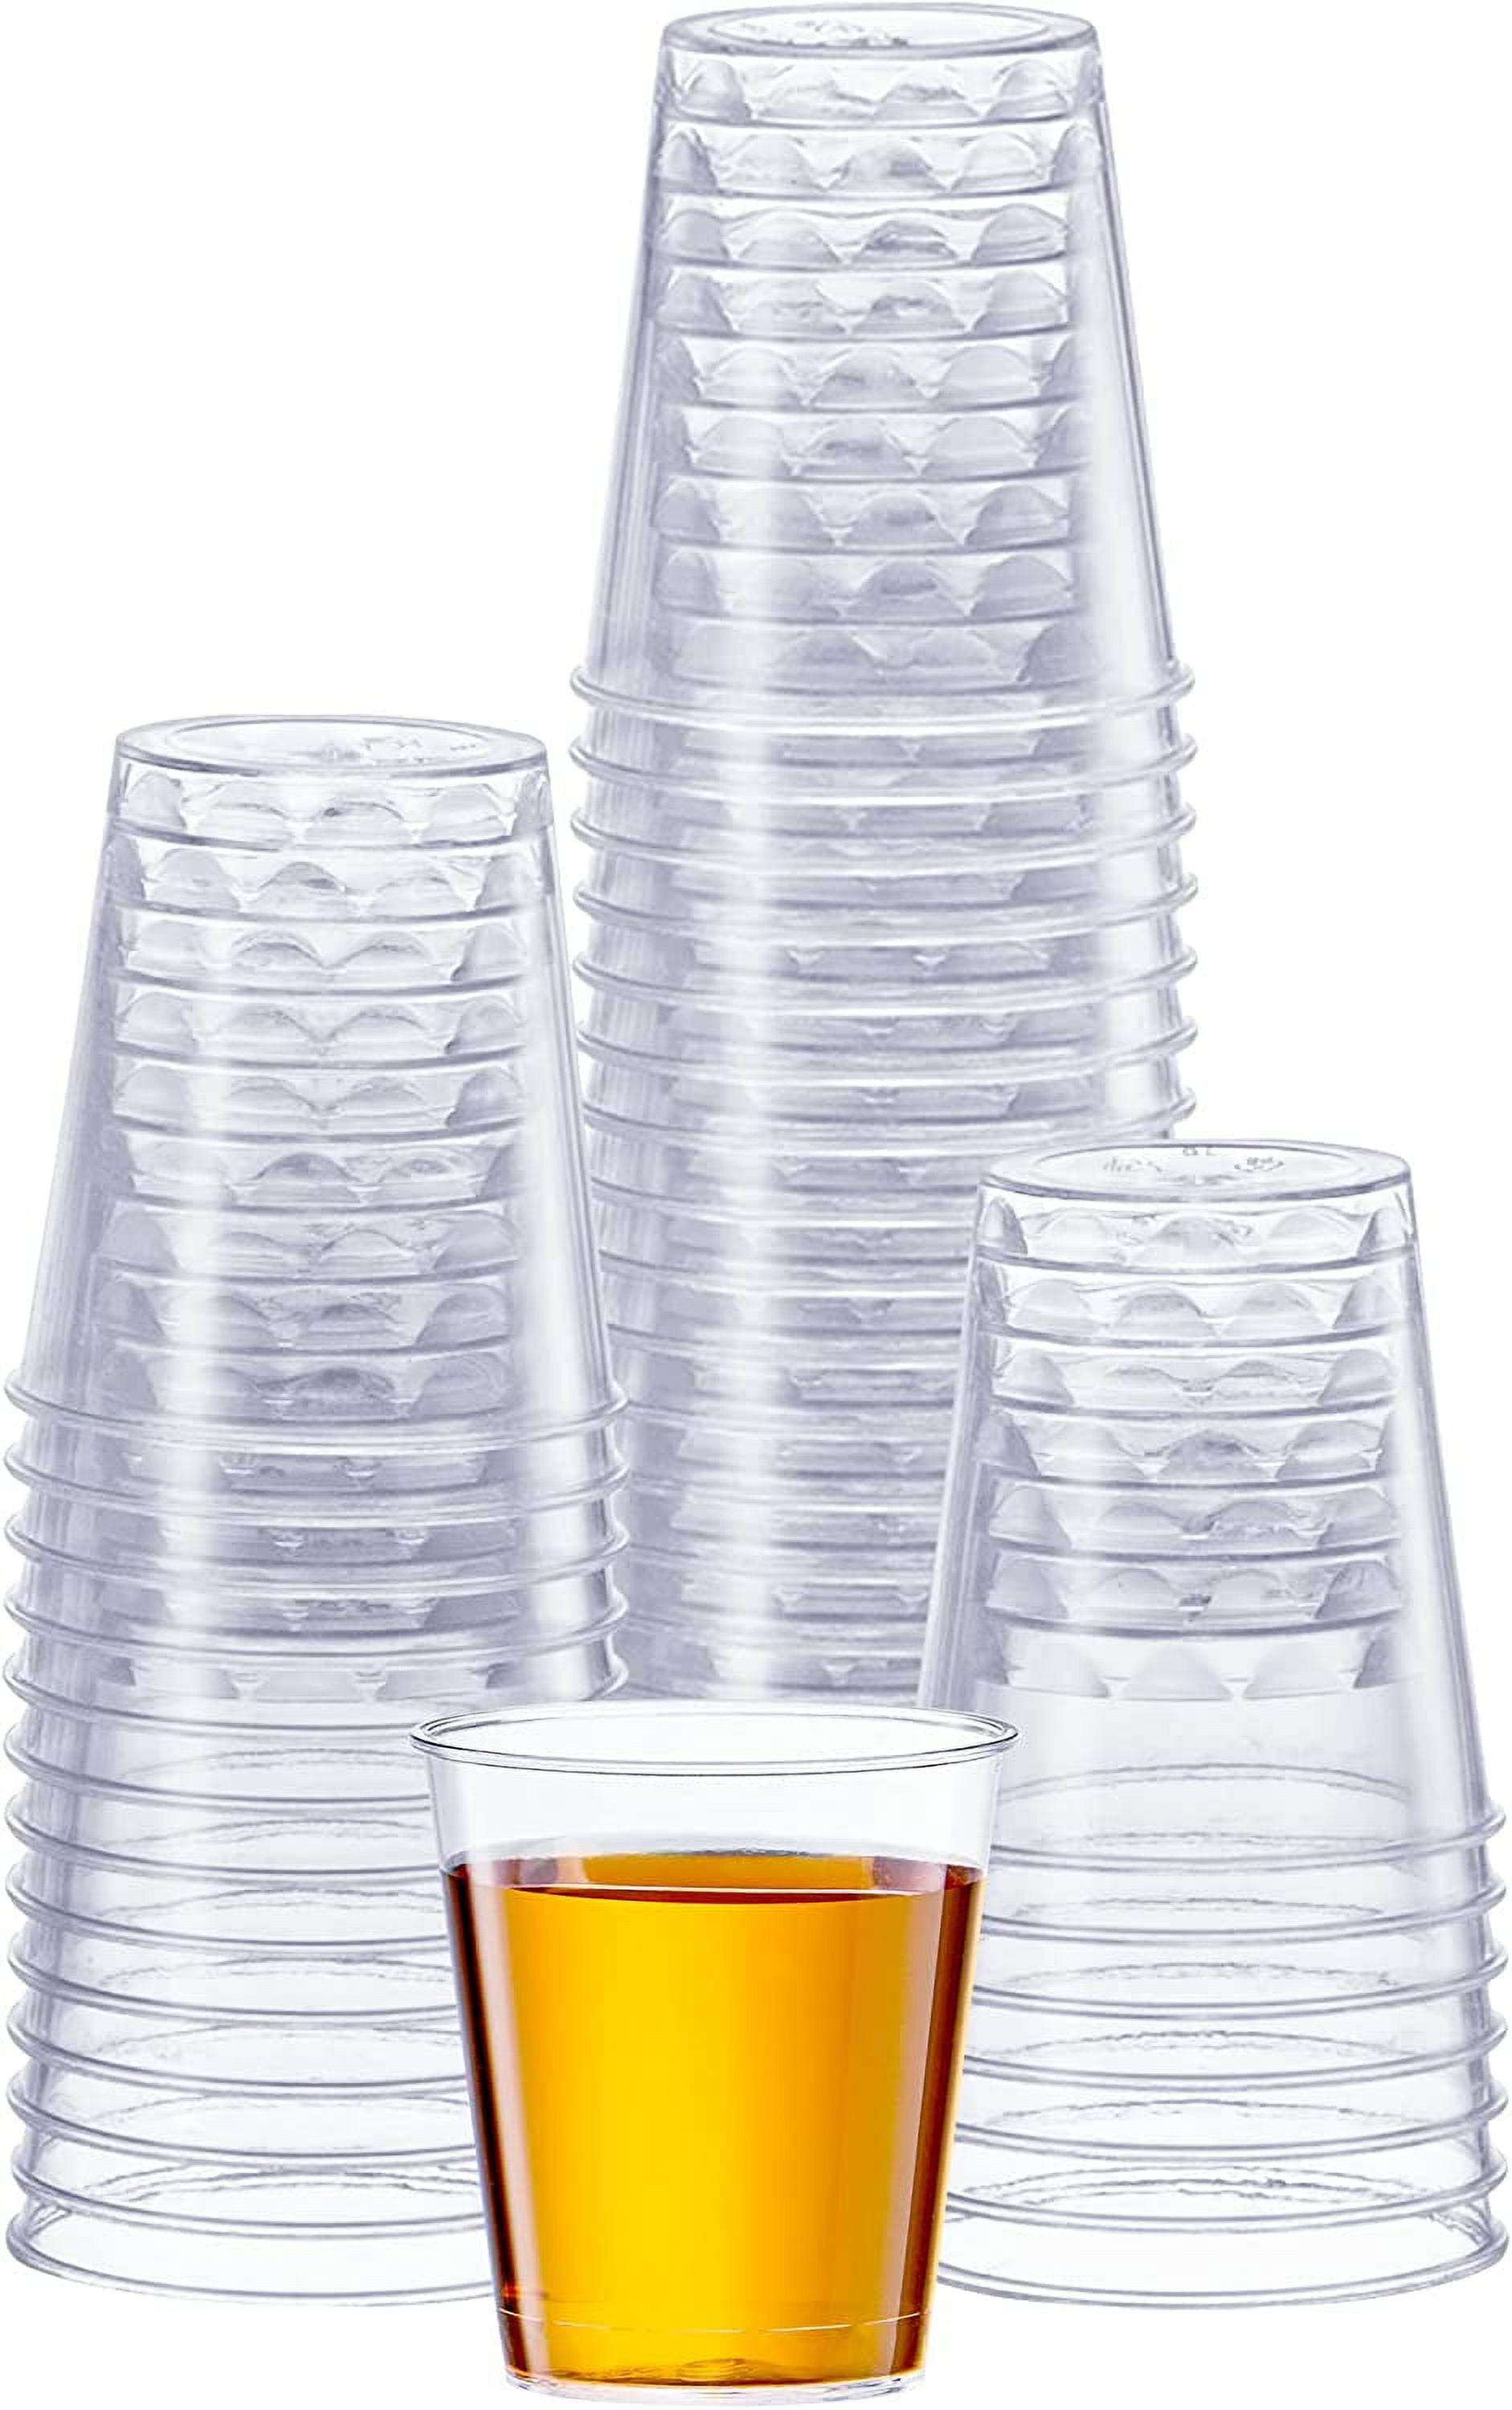 Stock Your Home 100 Pack - Mini Plastic Shot Glasses (1oz) Clear Disposable Cups for Jello Shots, Wine Tasting, Liquor, Whiskey, Pudding, Sample Cup